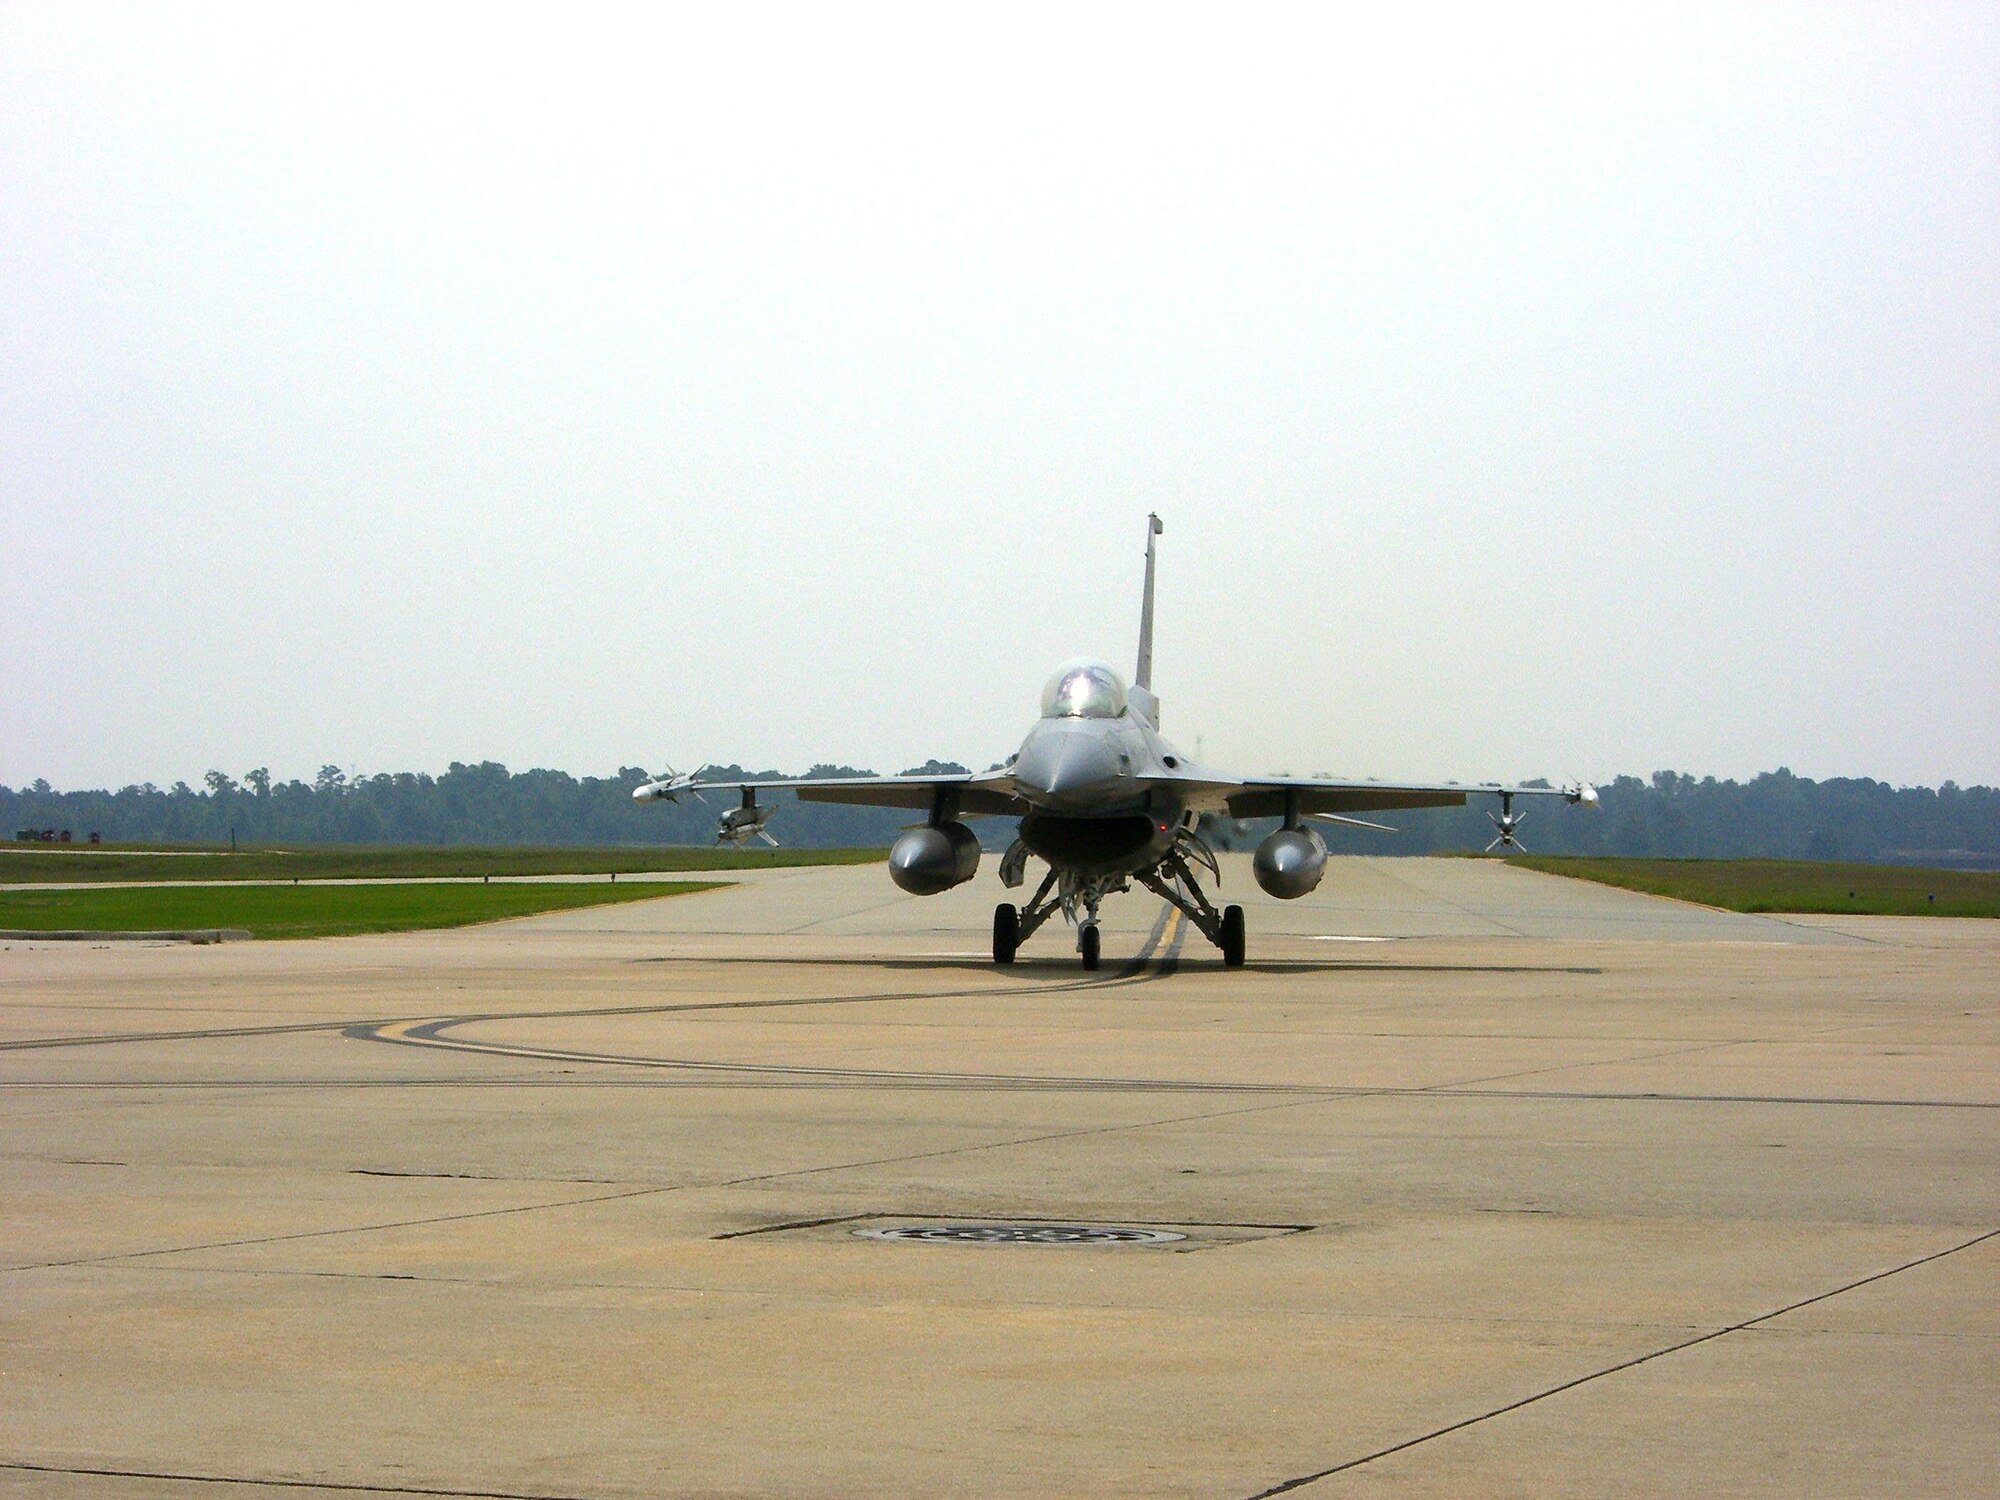 A 148th Fighter Wing F-16 from Duluth, Minn., taxis upon arrival at Shaw Air Force Base, Friday, June 22nd.  The 148th Fighter Wing is temporarily filling an Air Sovereignty Alert mission at there.